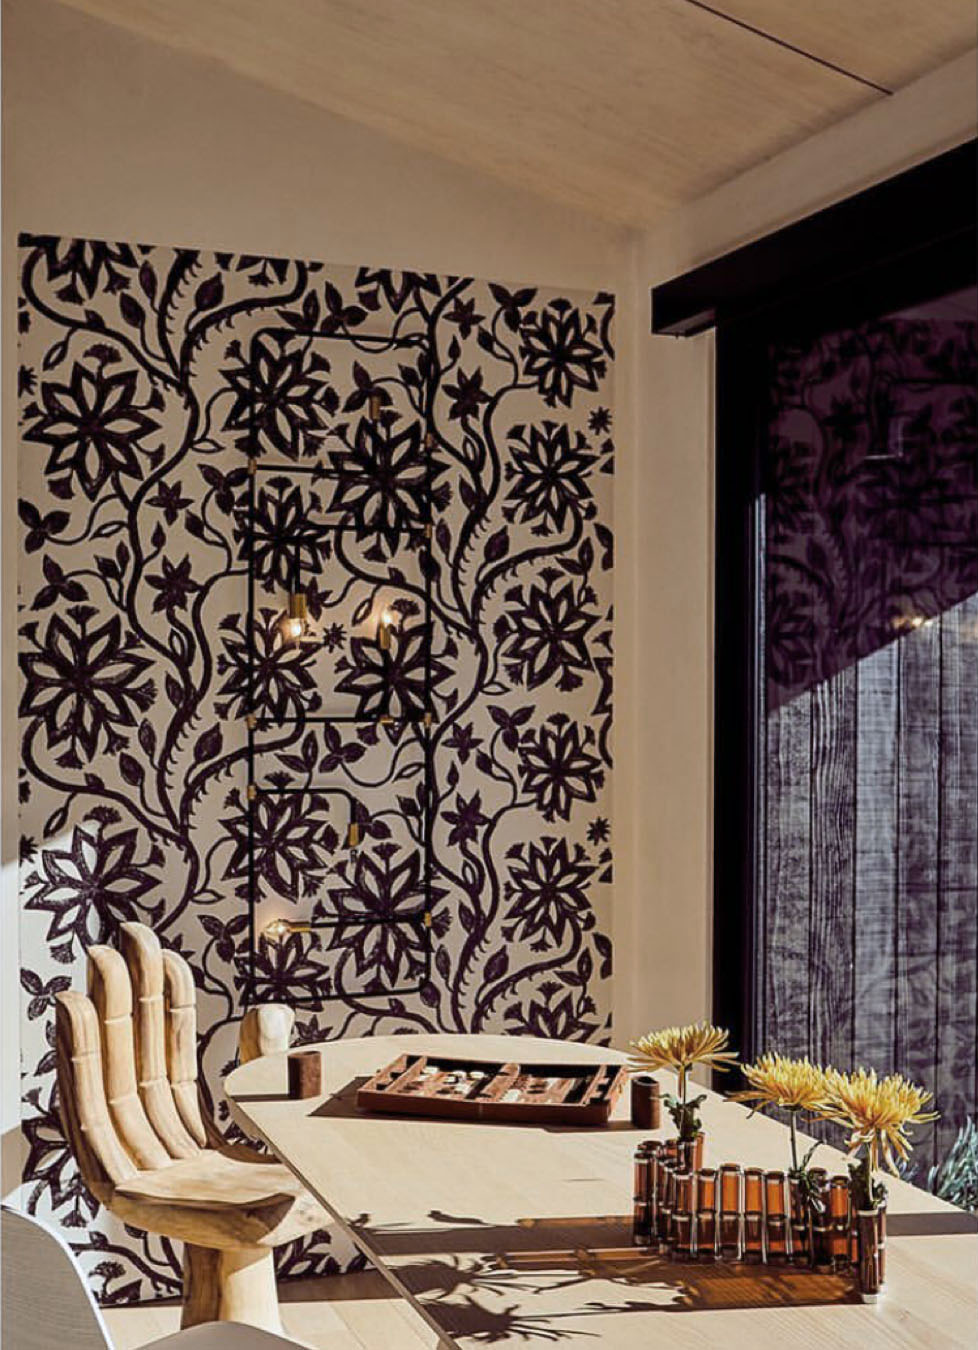 Khovar wallpaper in a dining room designed by House of Honey